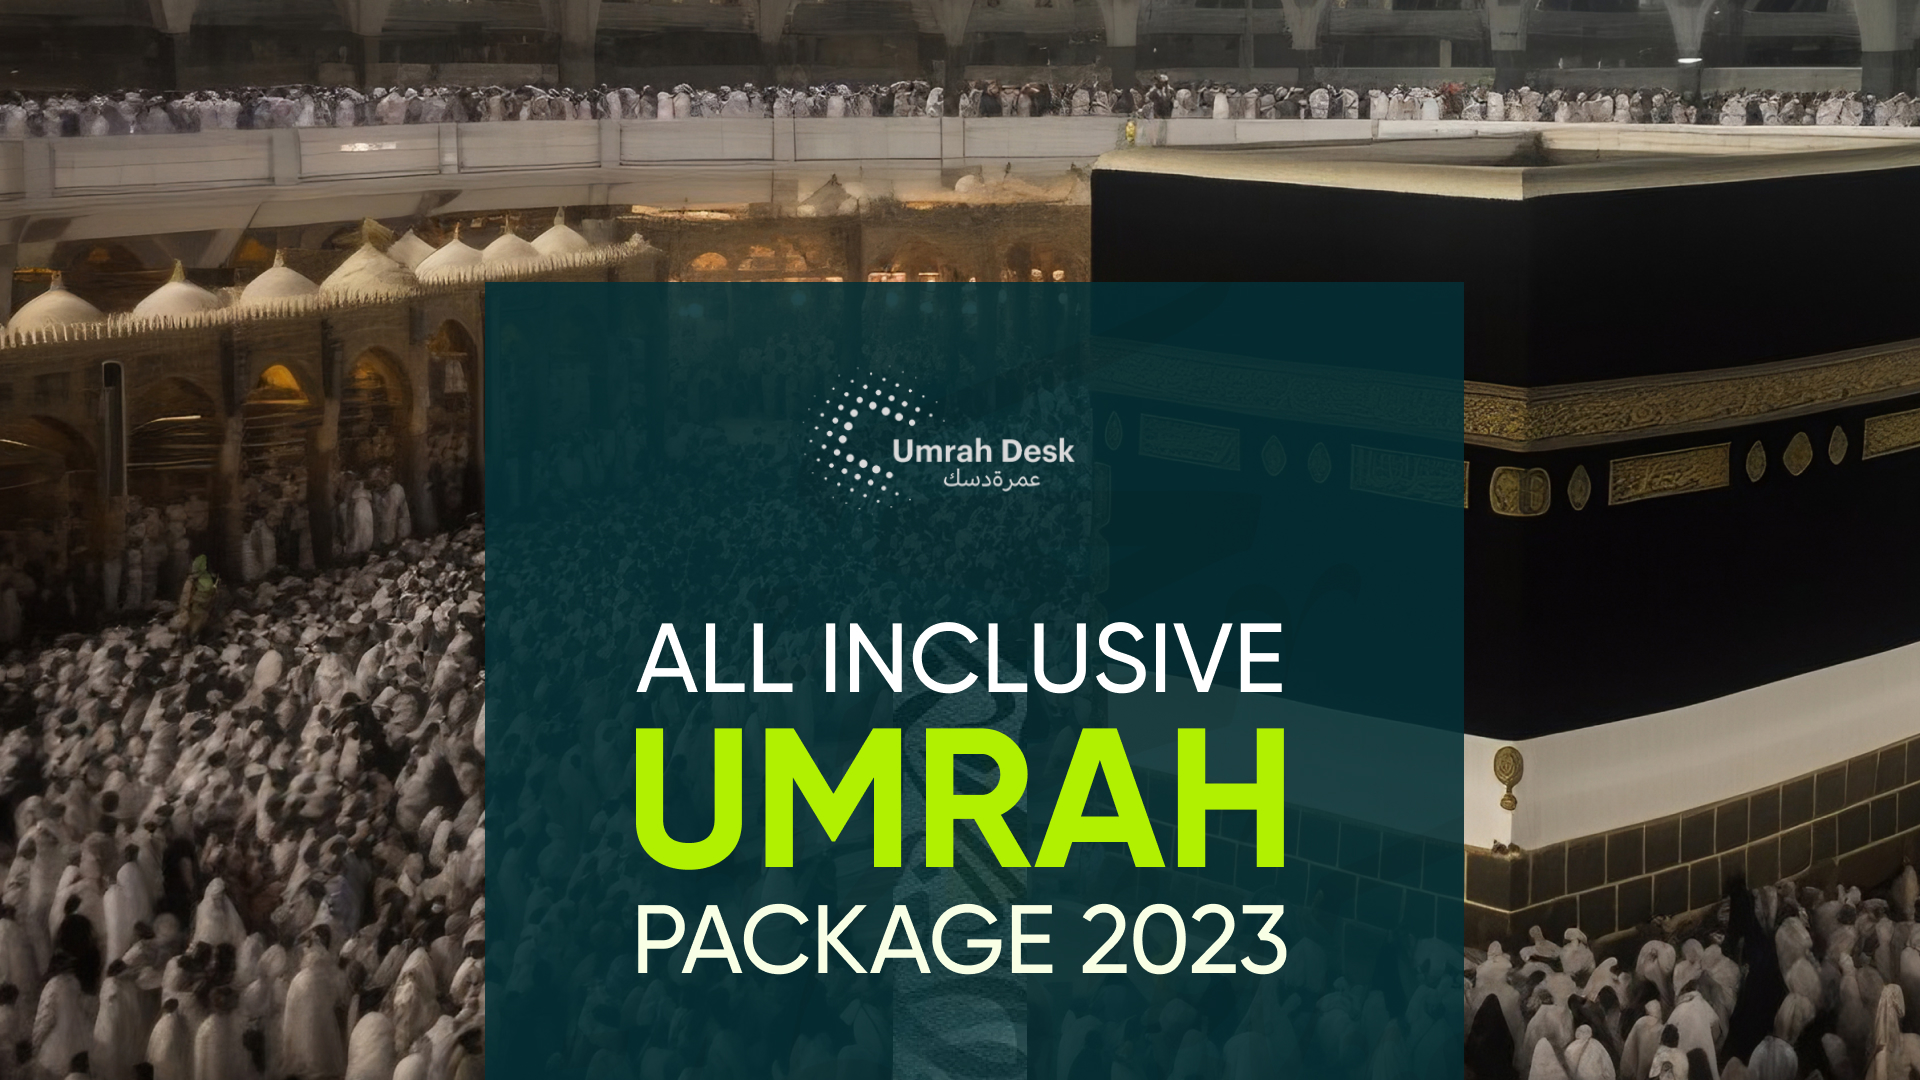 All inclusive umrah package 2023